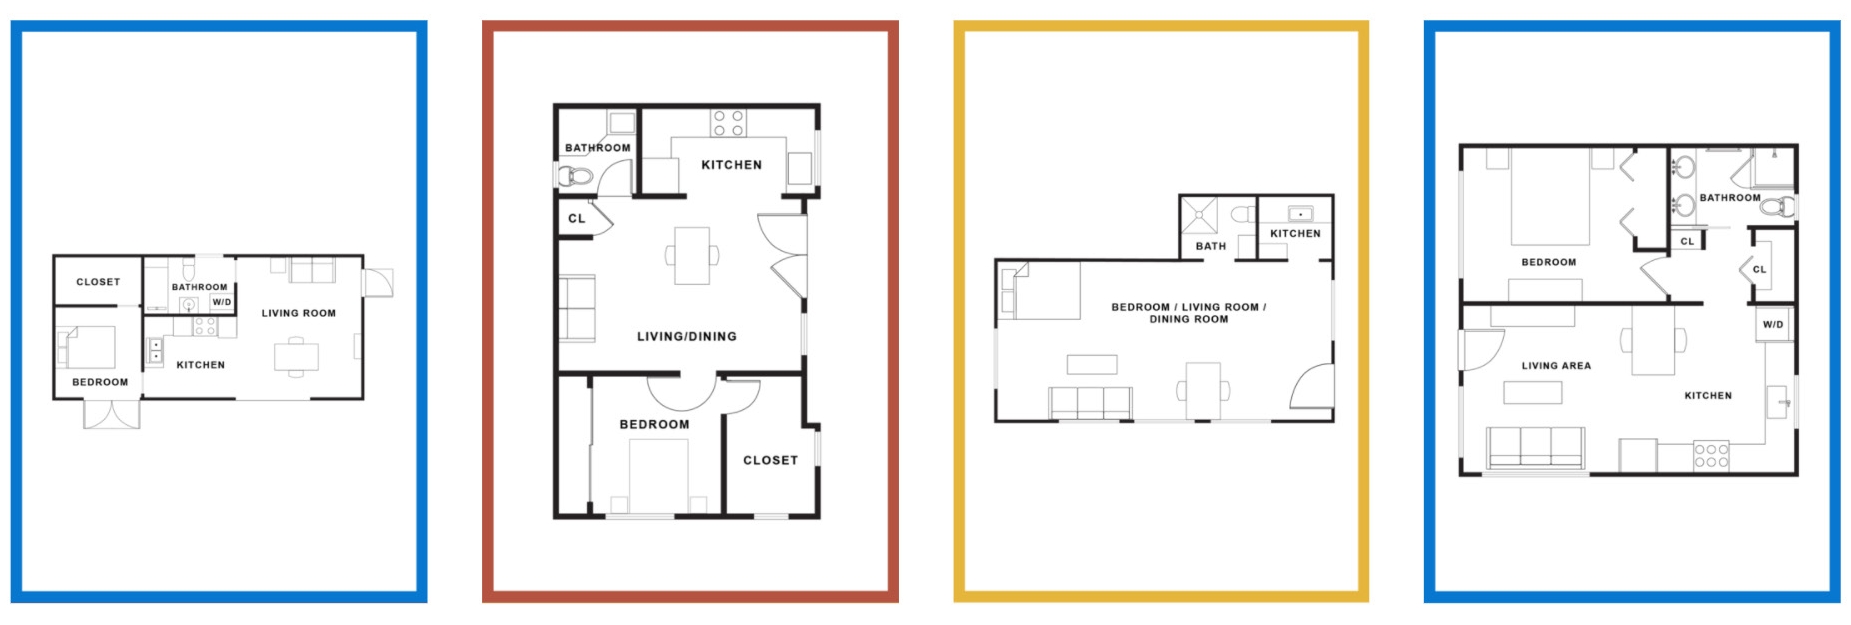 Example floor plans of second units. More found at adumarin.org